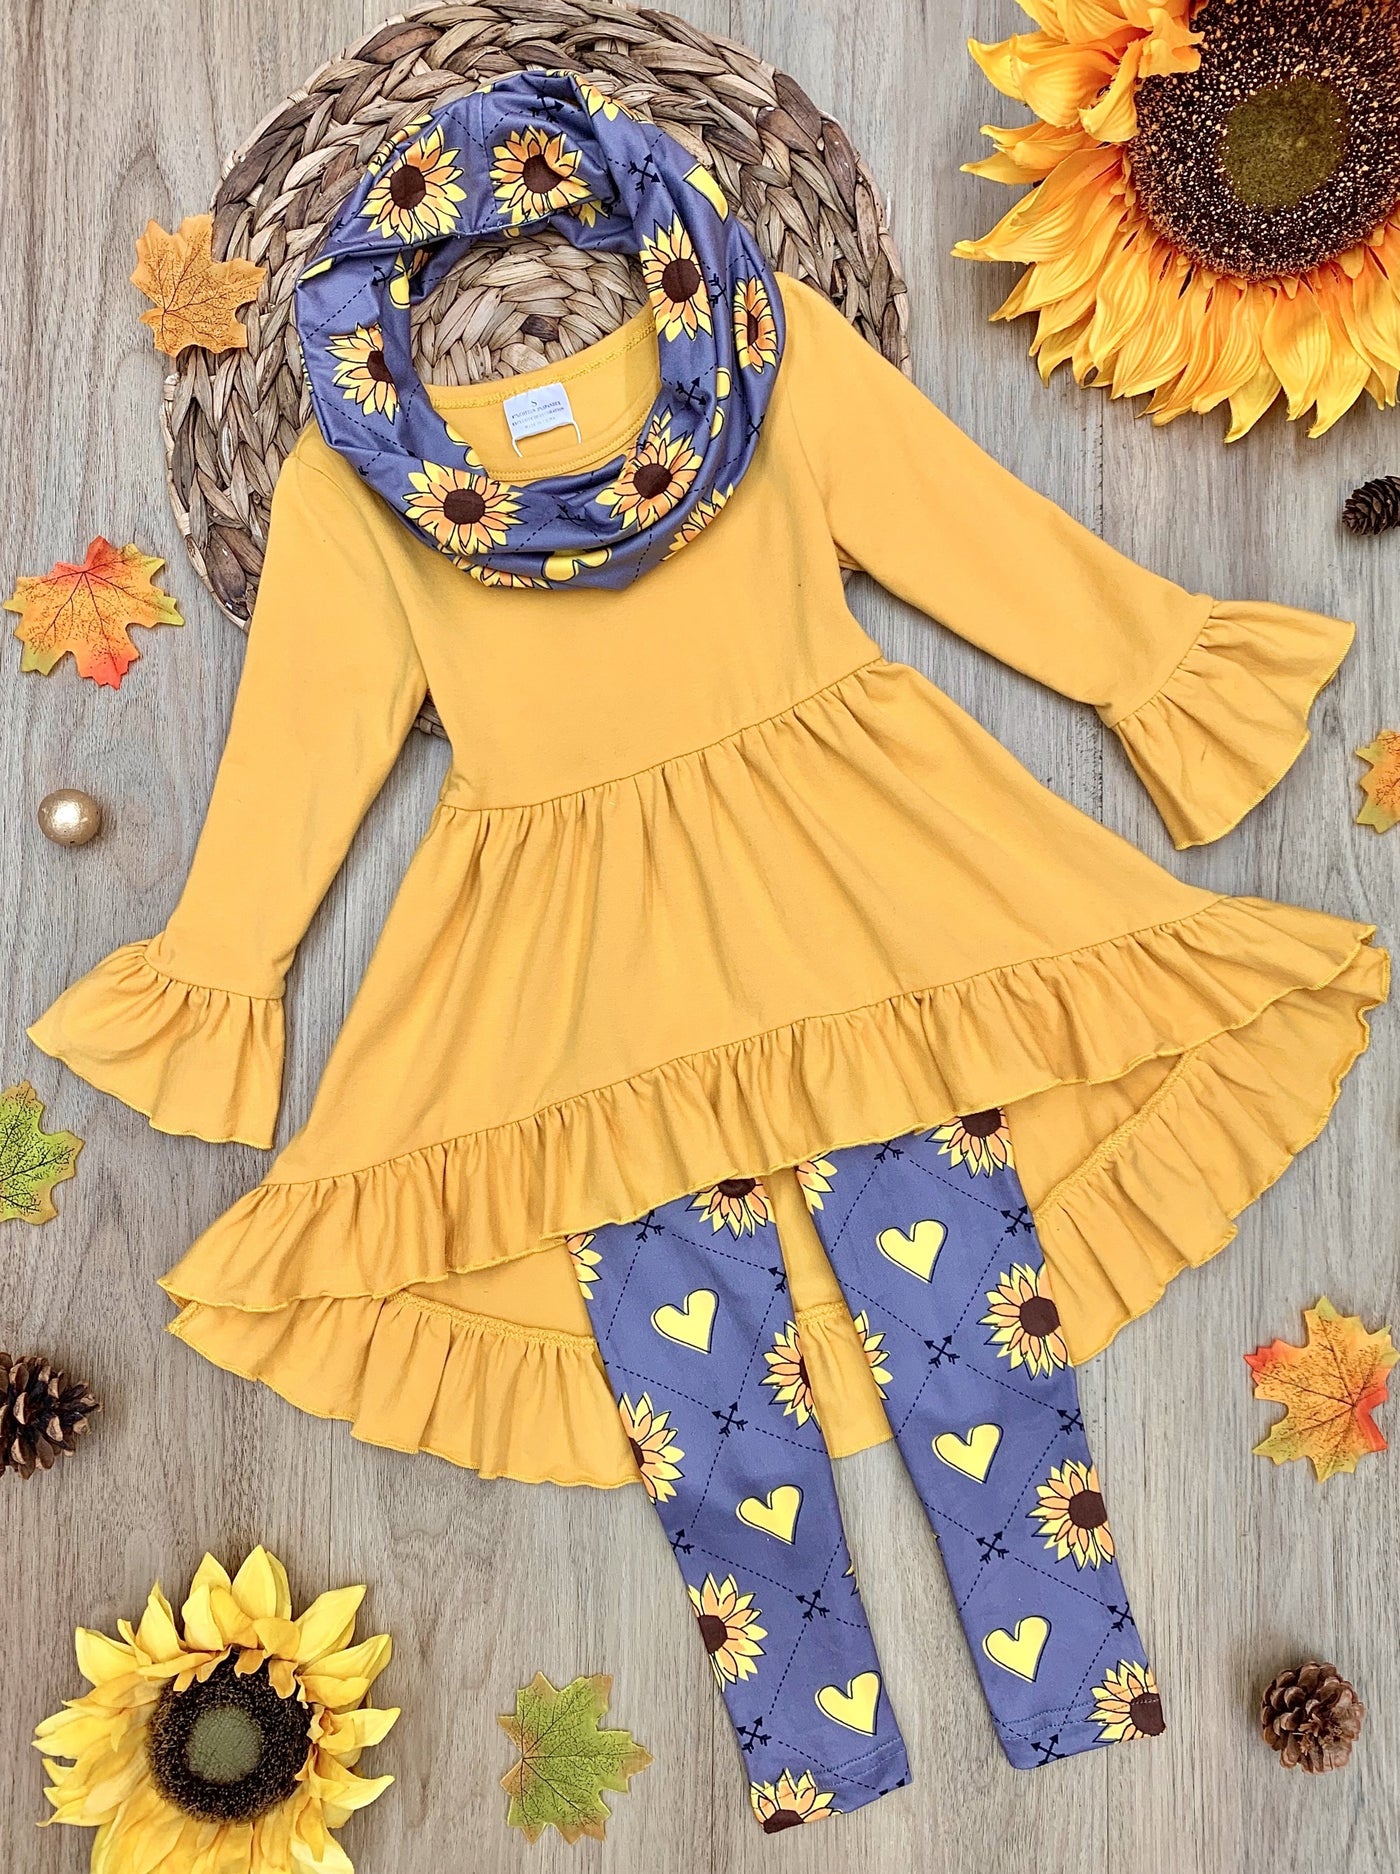 Girls Hi-Lo Ruffled Tunic, Sunflower and Hearts Leggings and Scarf Set - Girls Everyday Fall Clothes